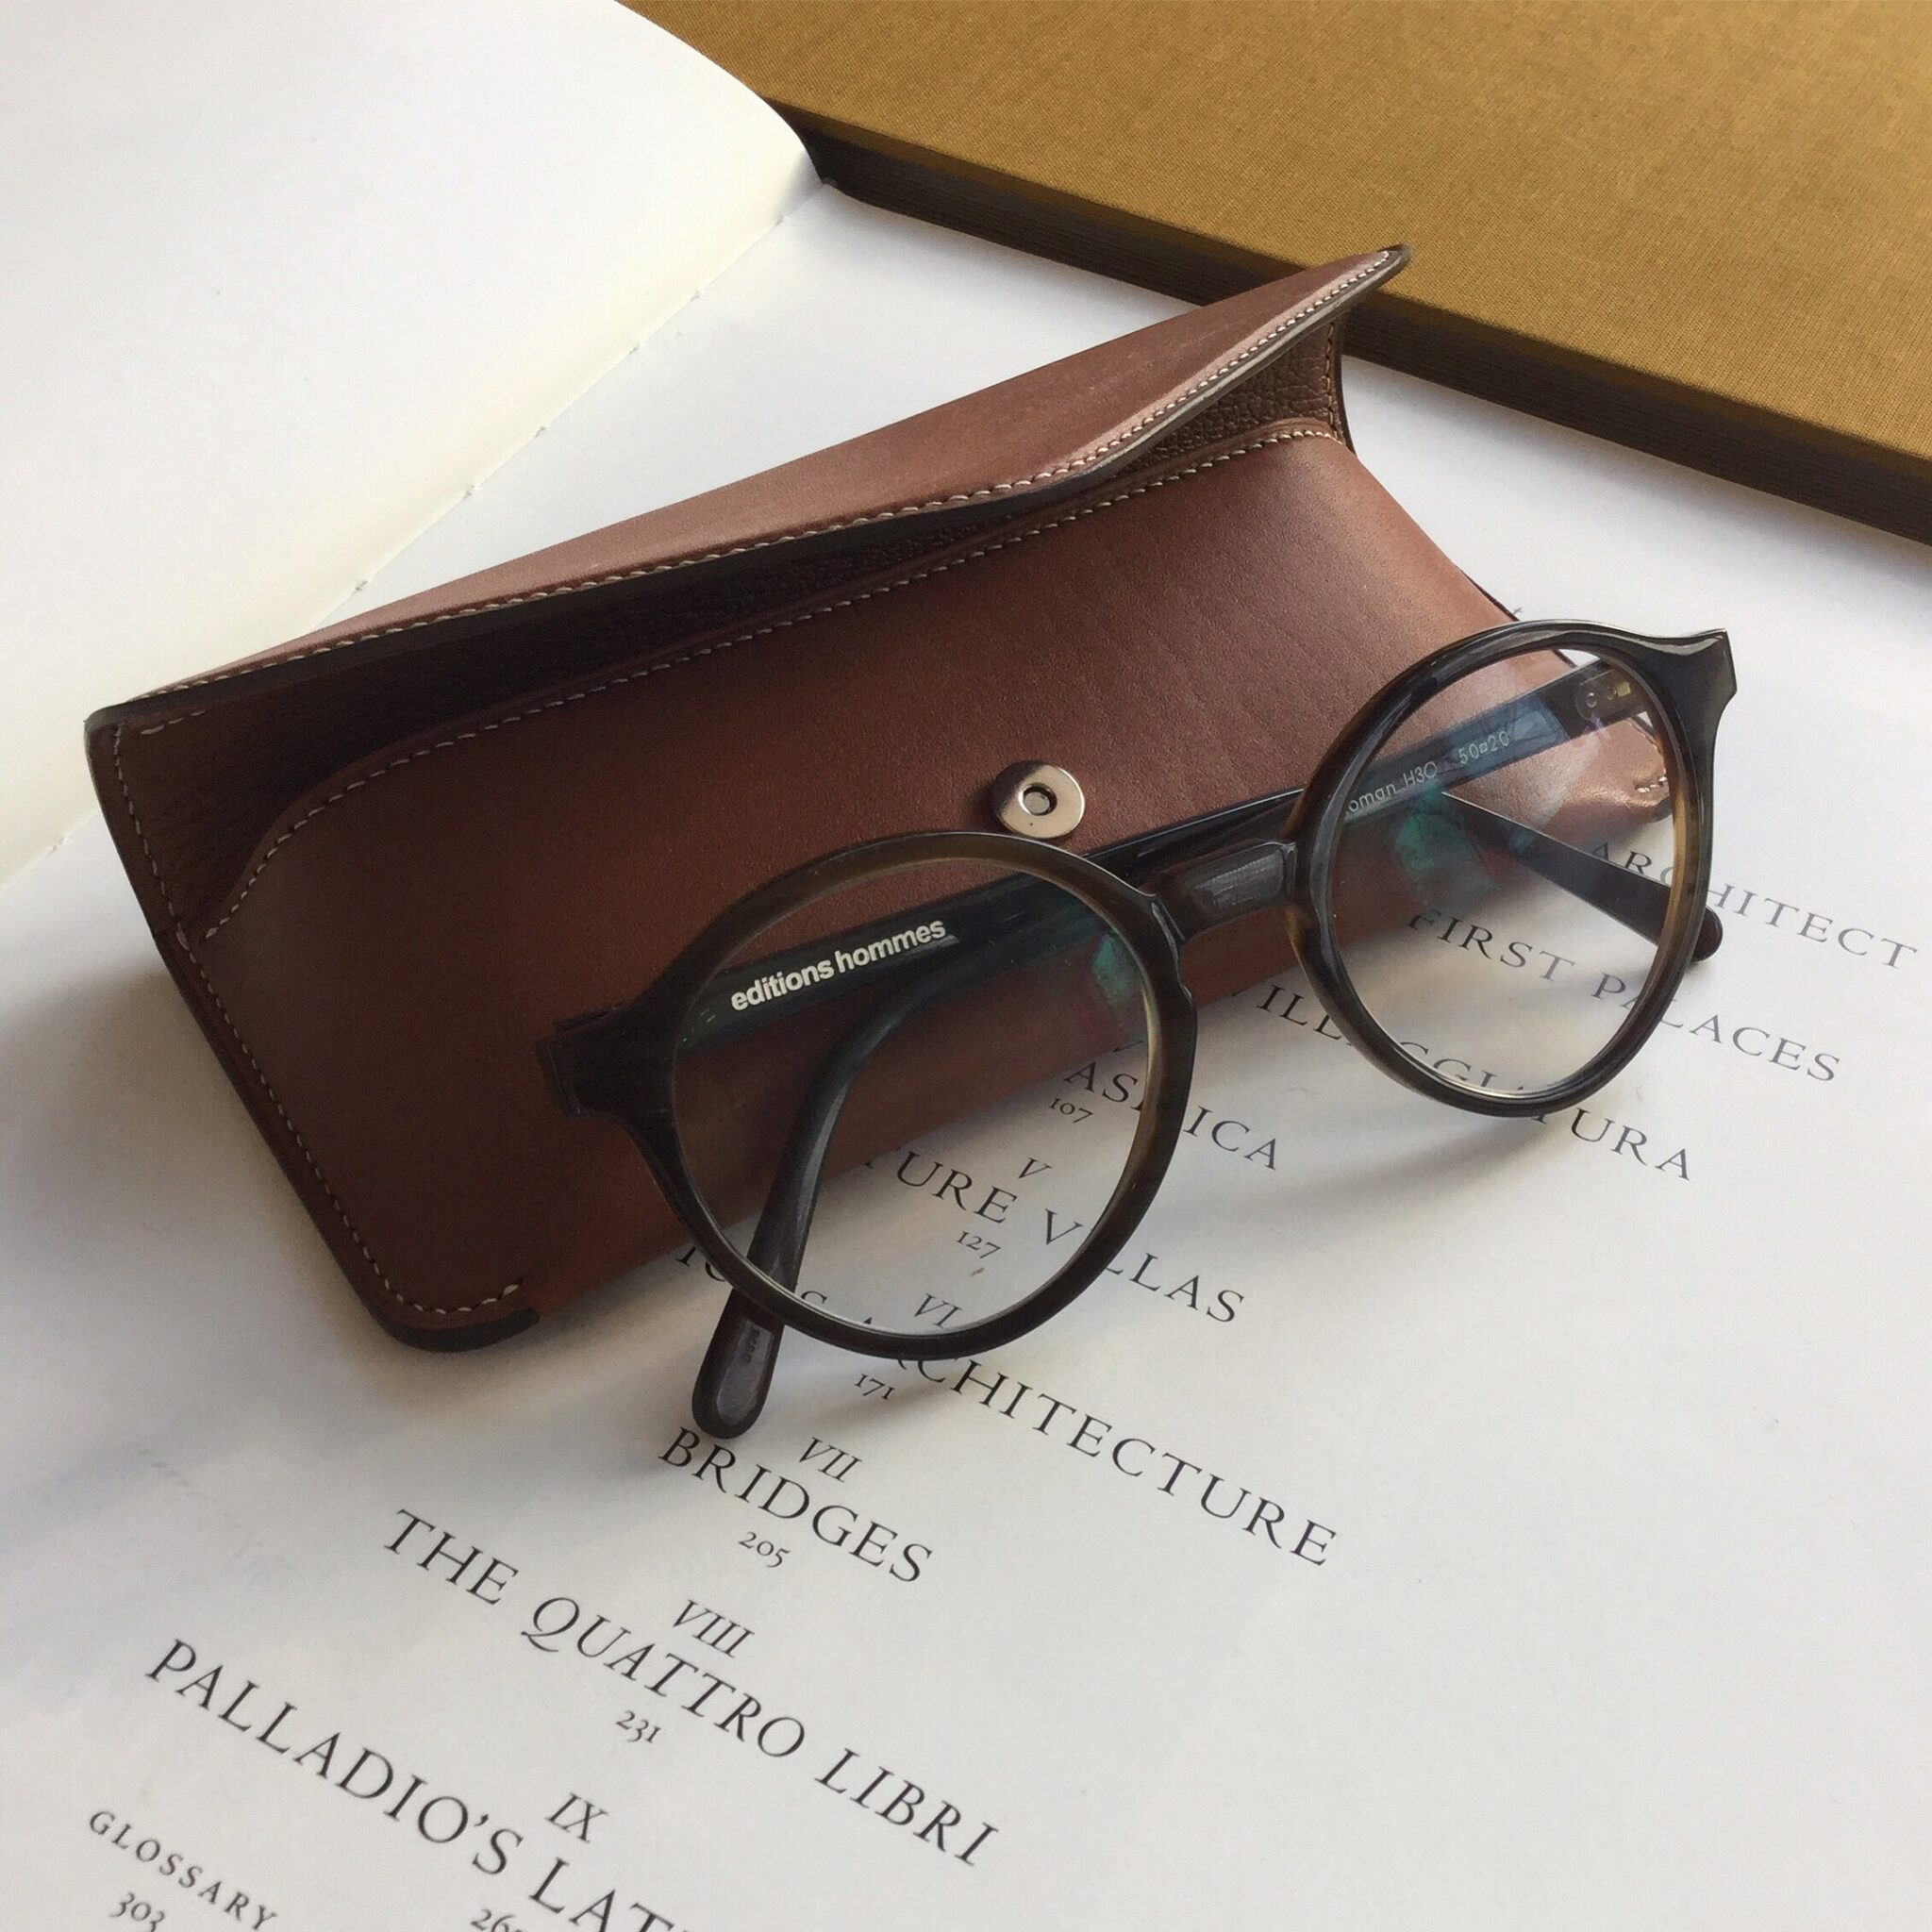 editions hommes horn spectacle frame 'Roman' with classic eyewear sleeve / snap button